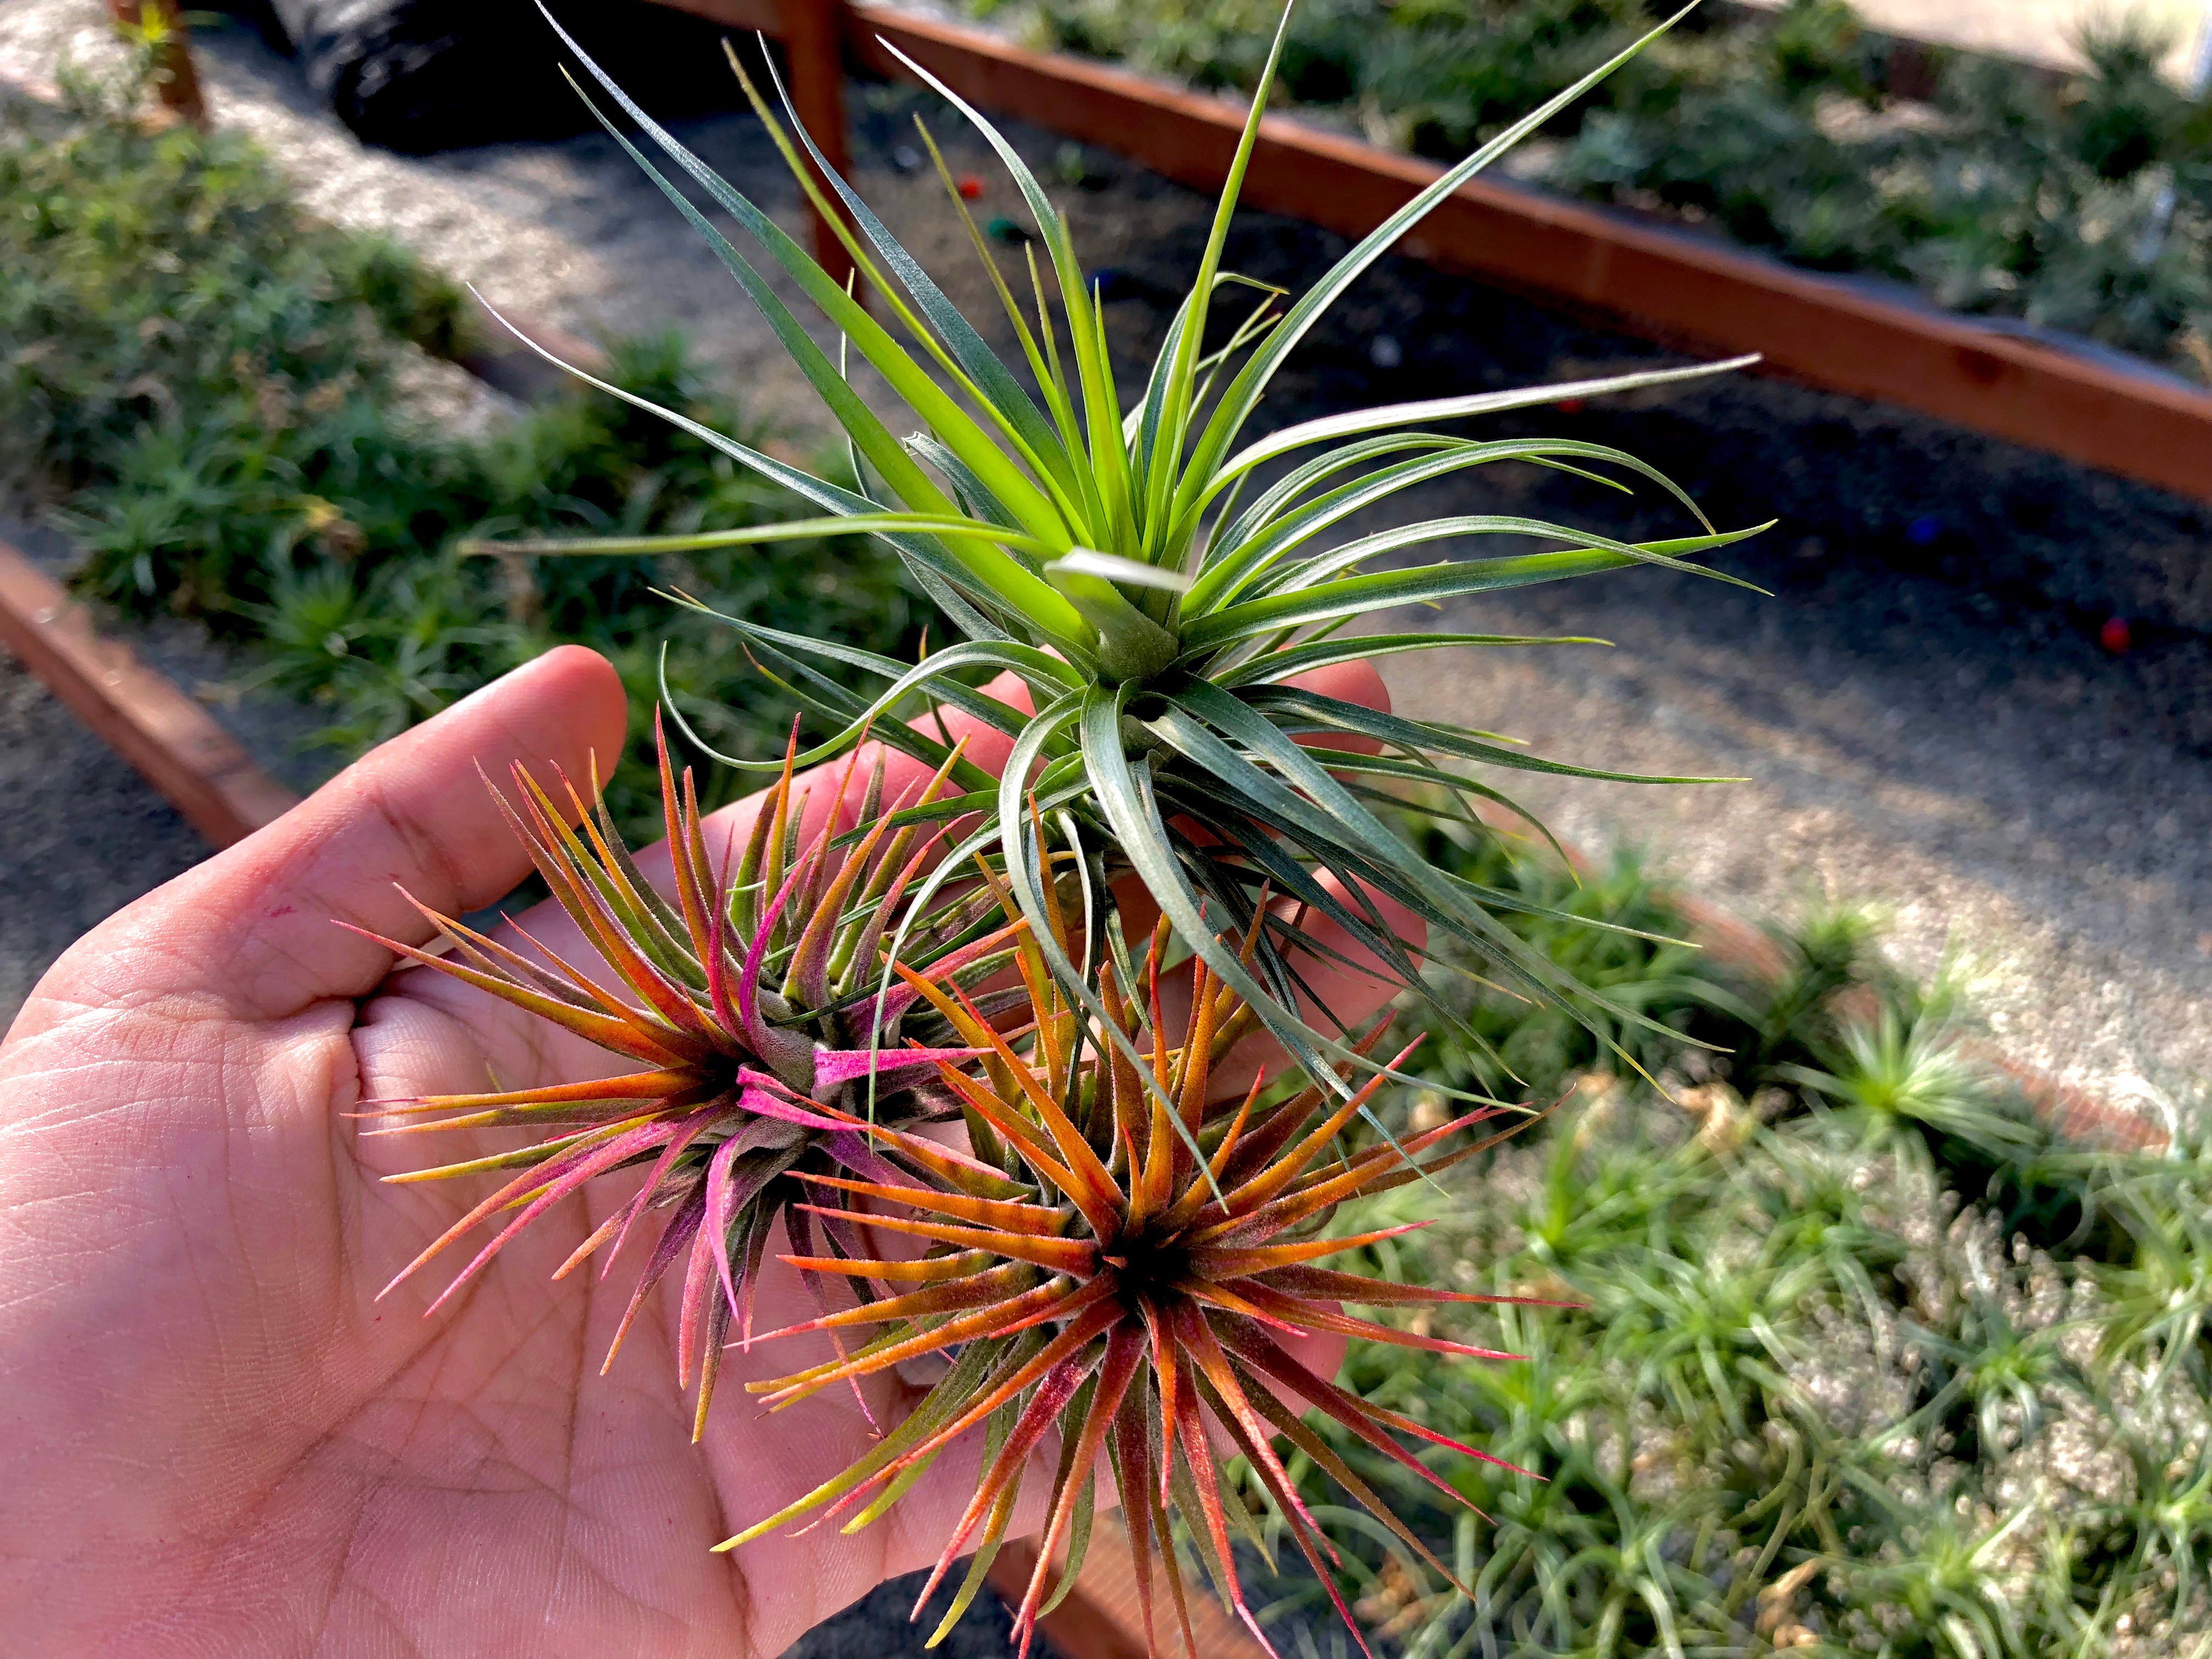 1 pink ionantha air plant, 1 red ionantha air plant, 1 stricta green air plant for sale and being held in hand